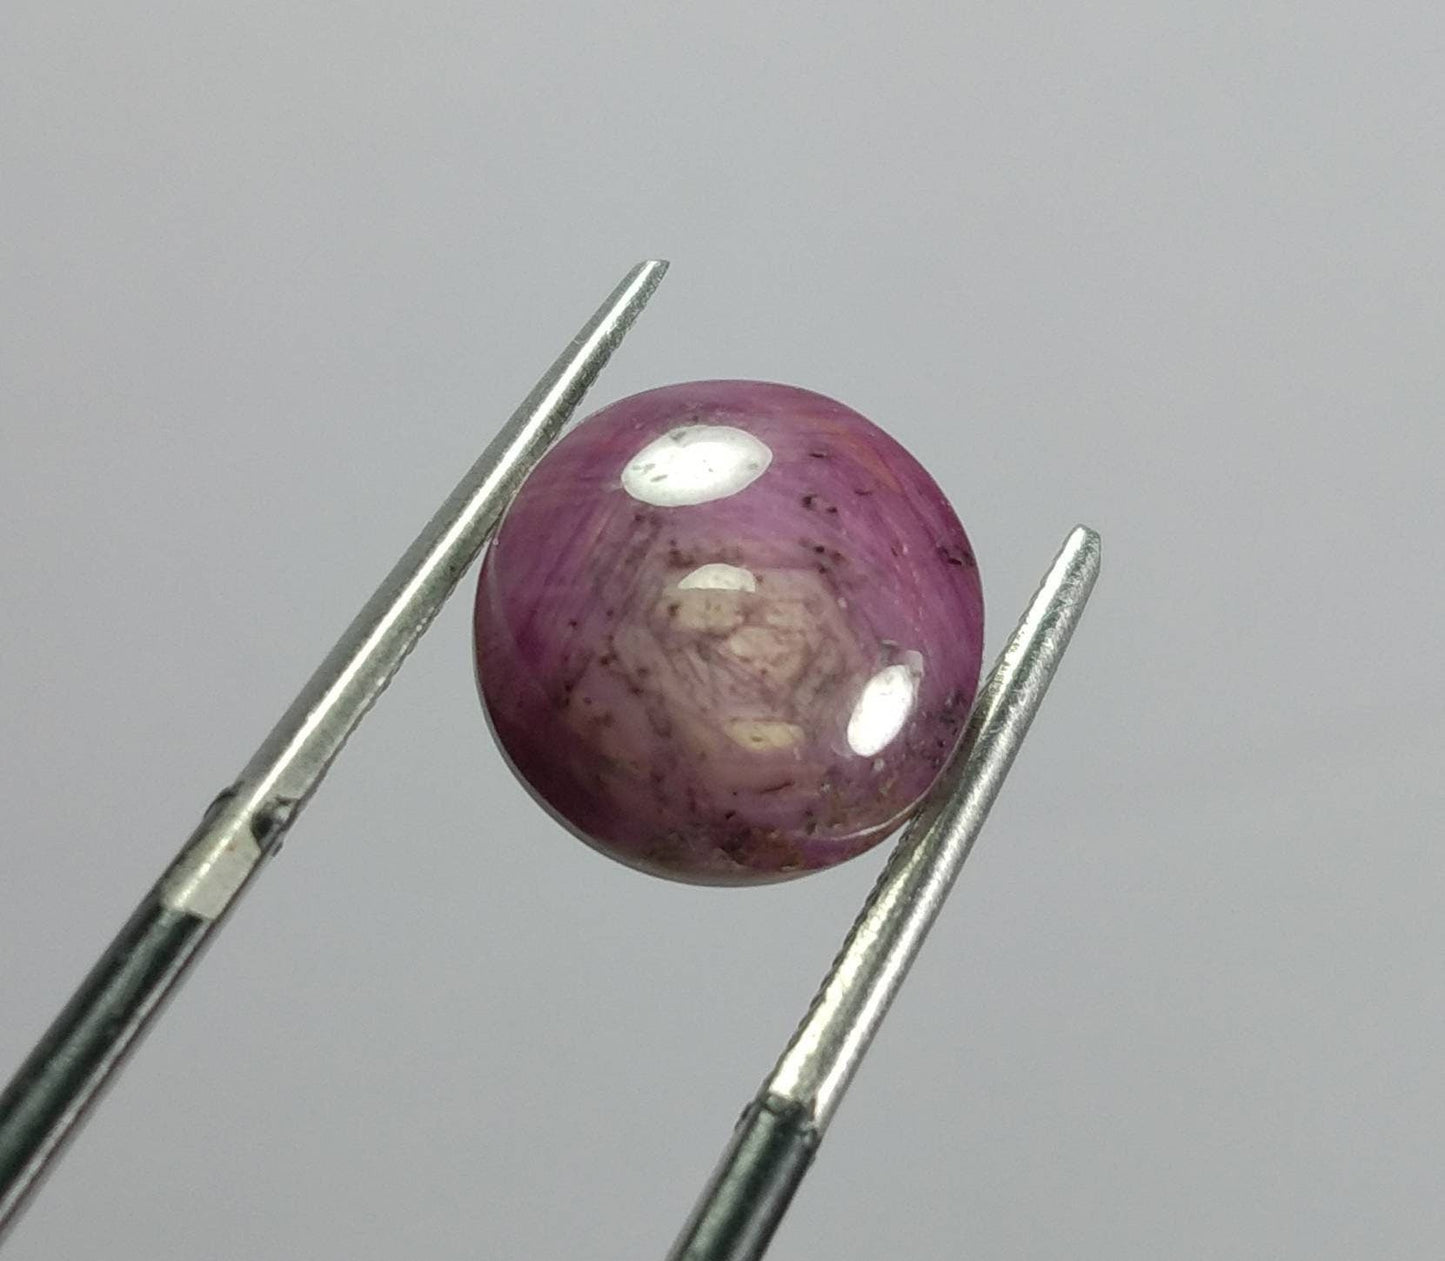 ARSAA GEMS AND MINERALSNatural aesthetic Beautiful fine quality 8 carat star ruby oval shape cabochon - Premium  from ARSAA GEMS AND MINERALS - Just $15.00! Shop now at ARSAA GEMS AND MINERALS